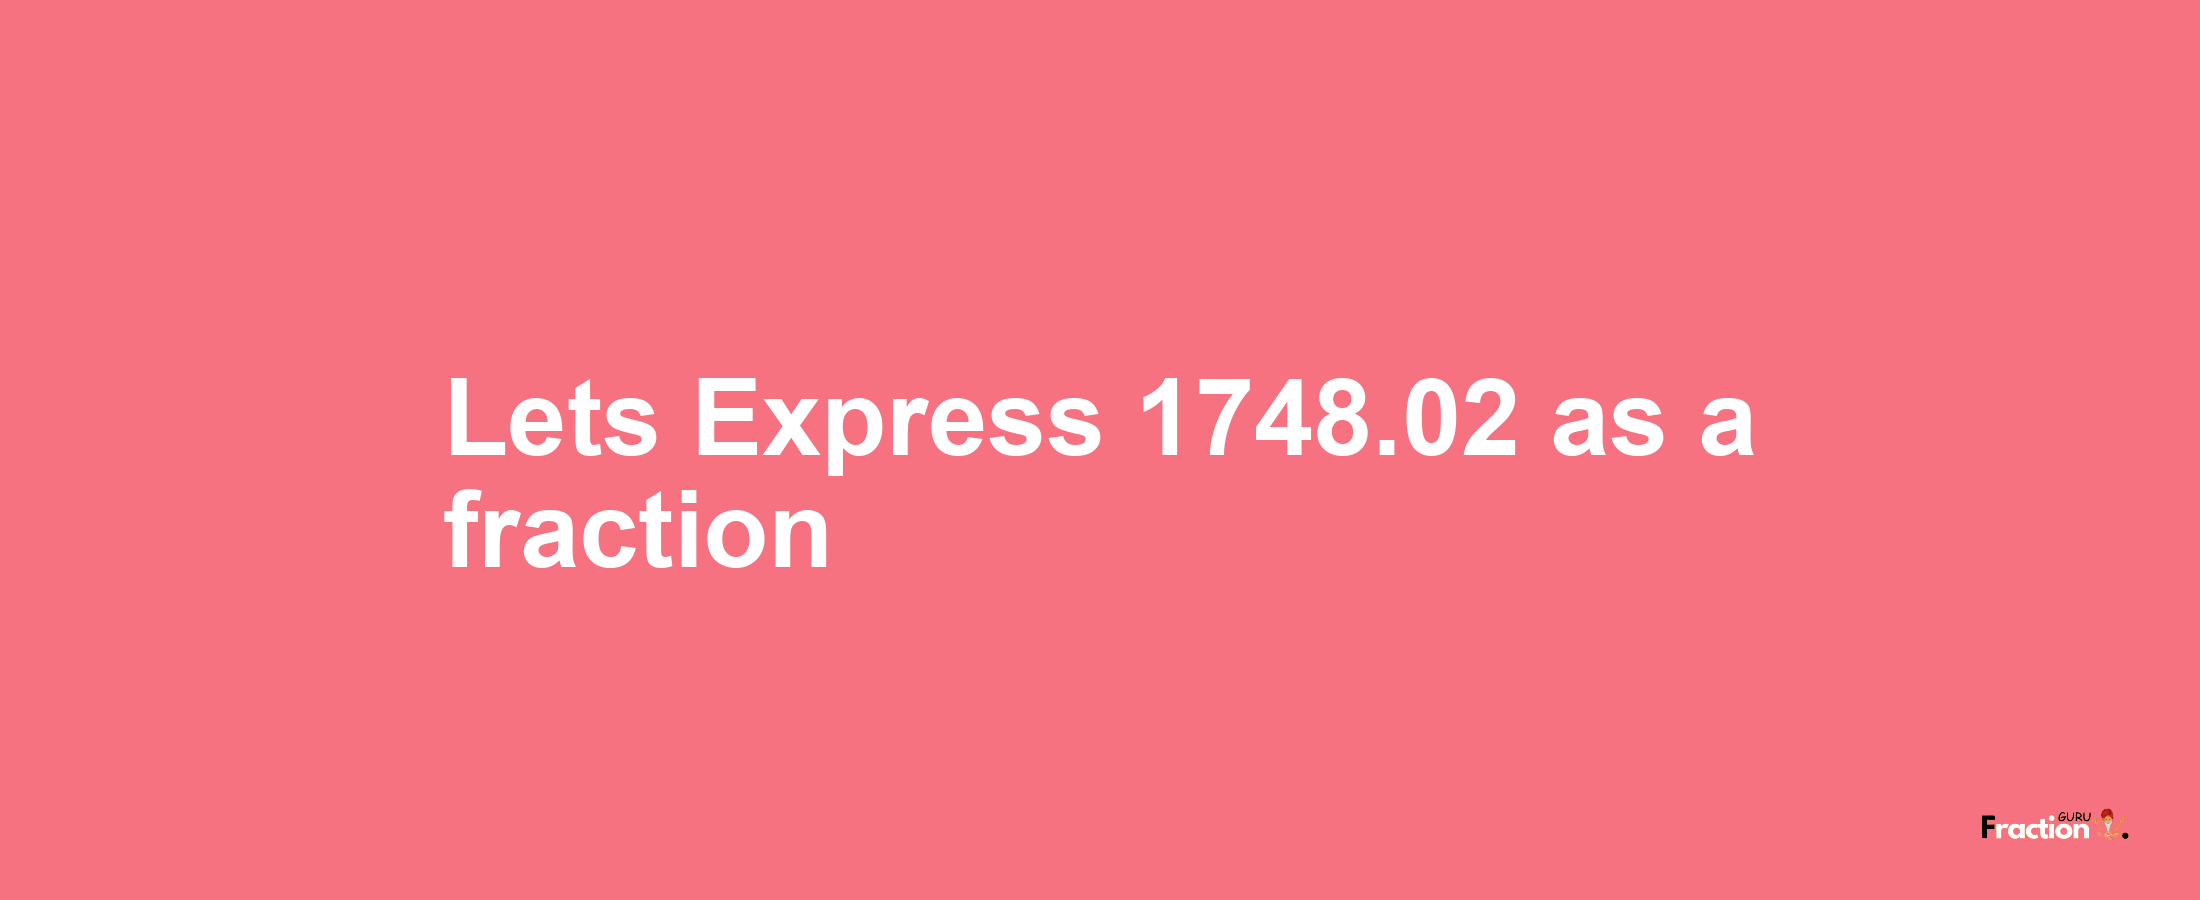 Lets Express 1748.02 as afraction